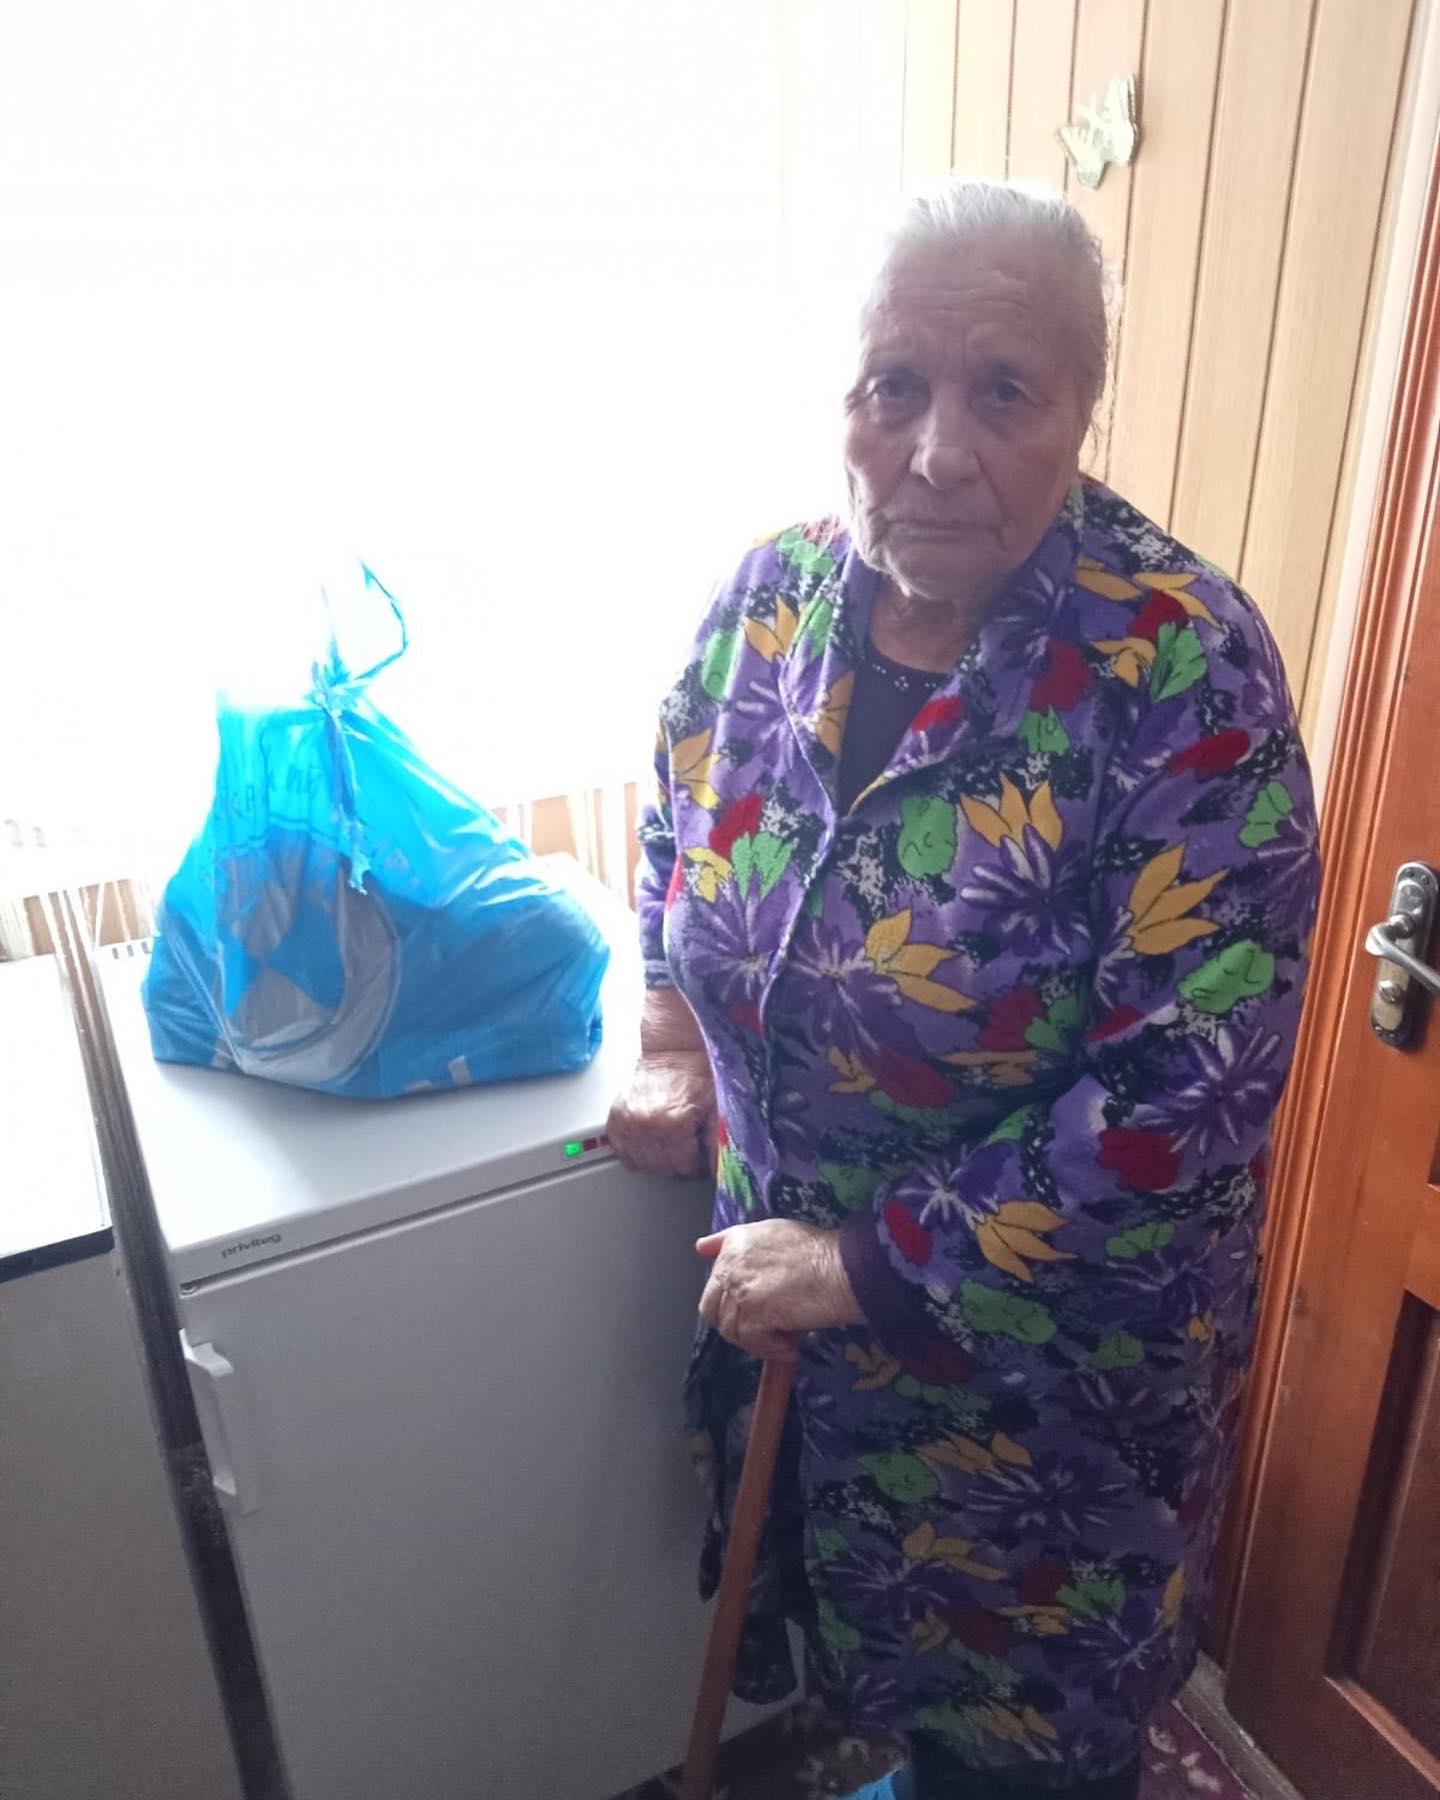 A woman with a cane standing next to a refrigerator.